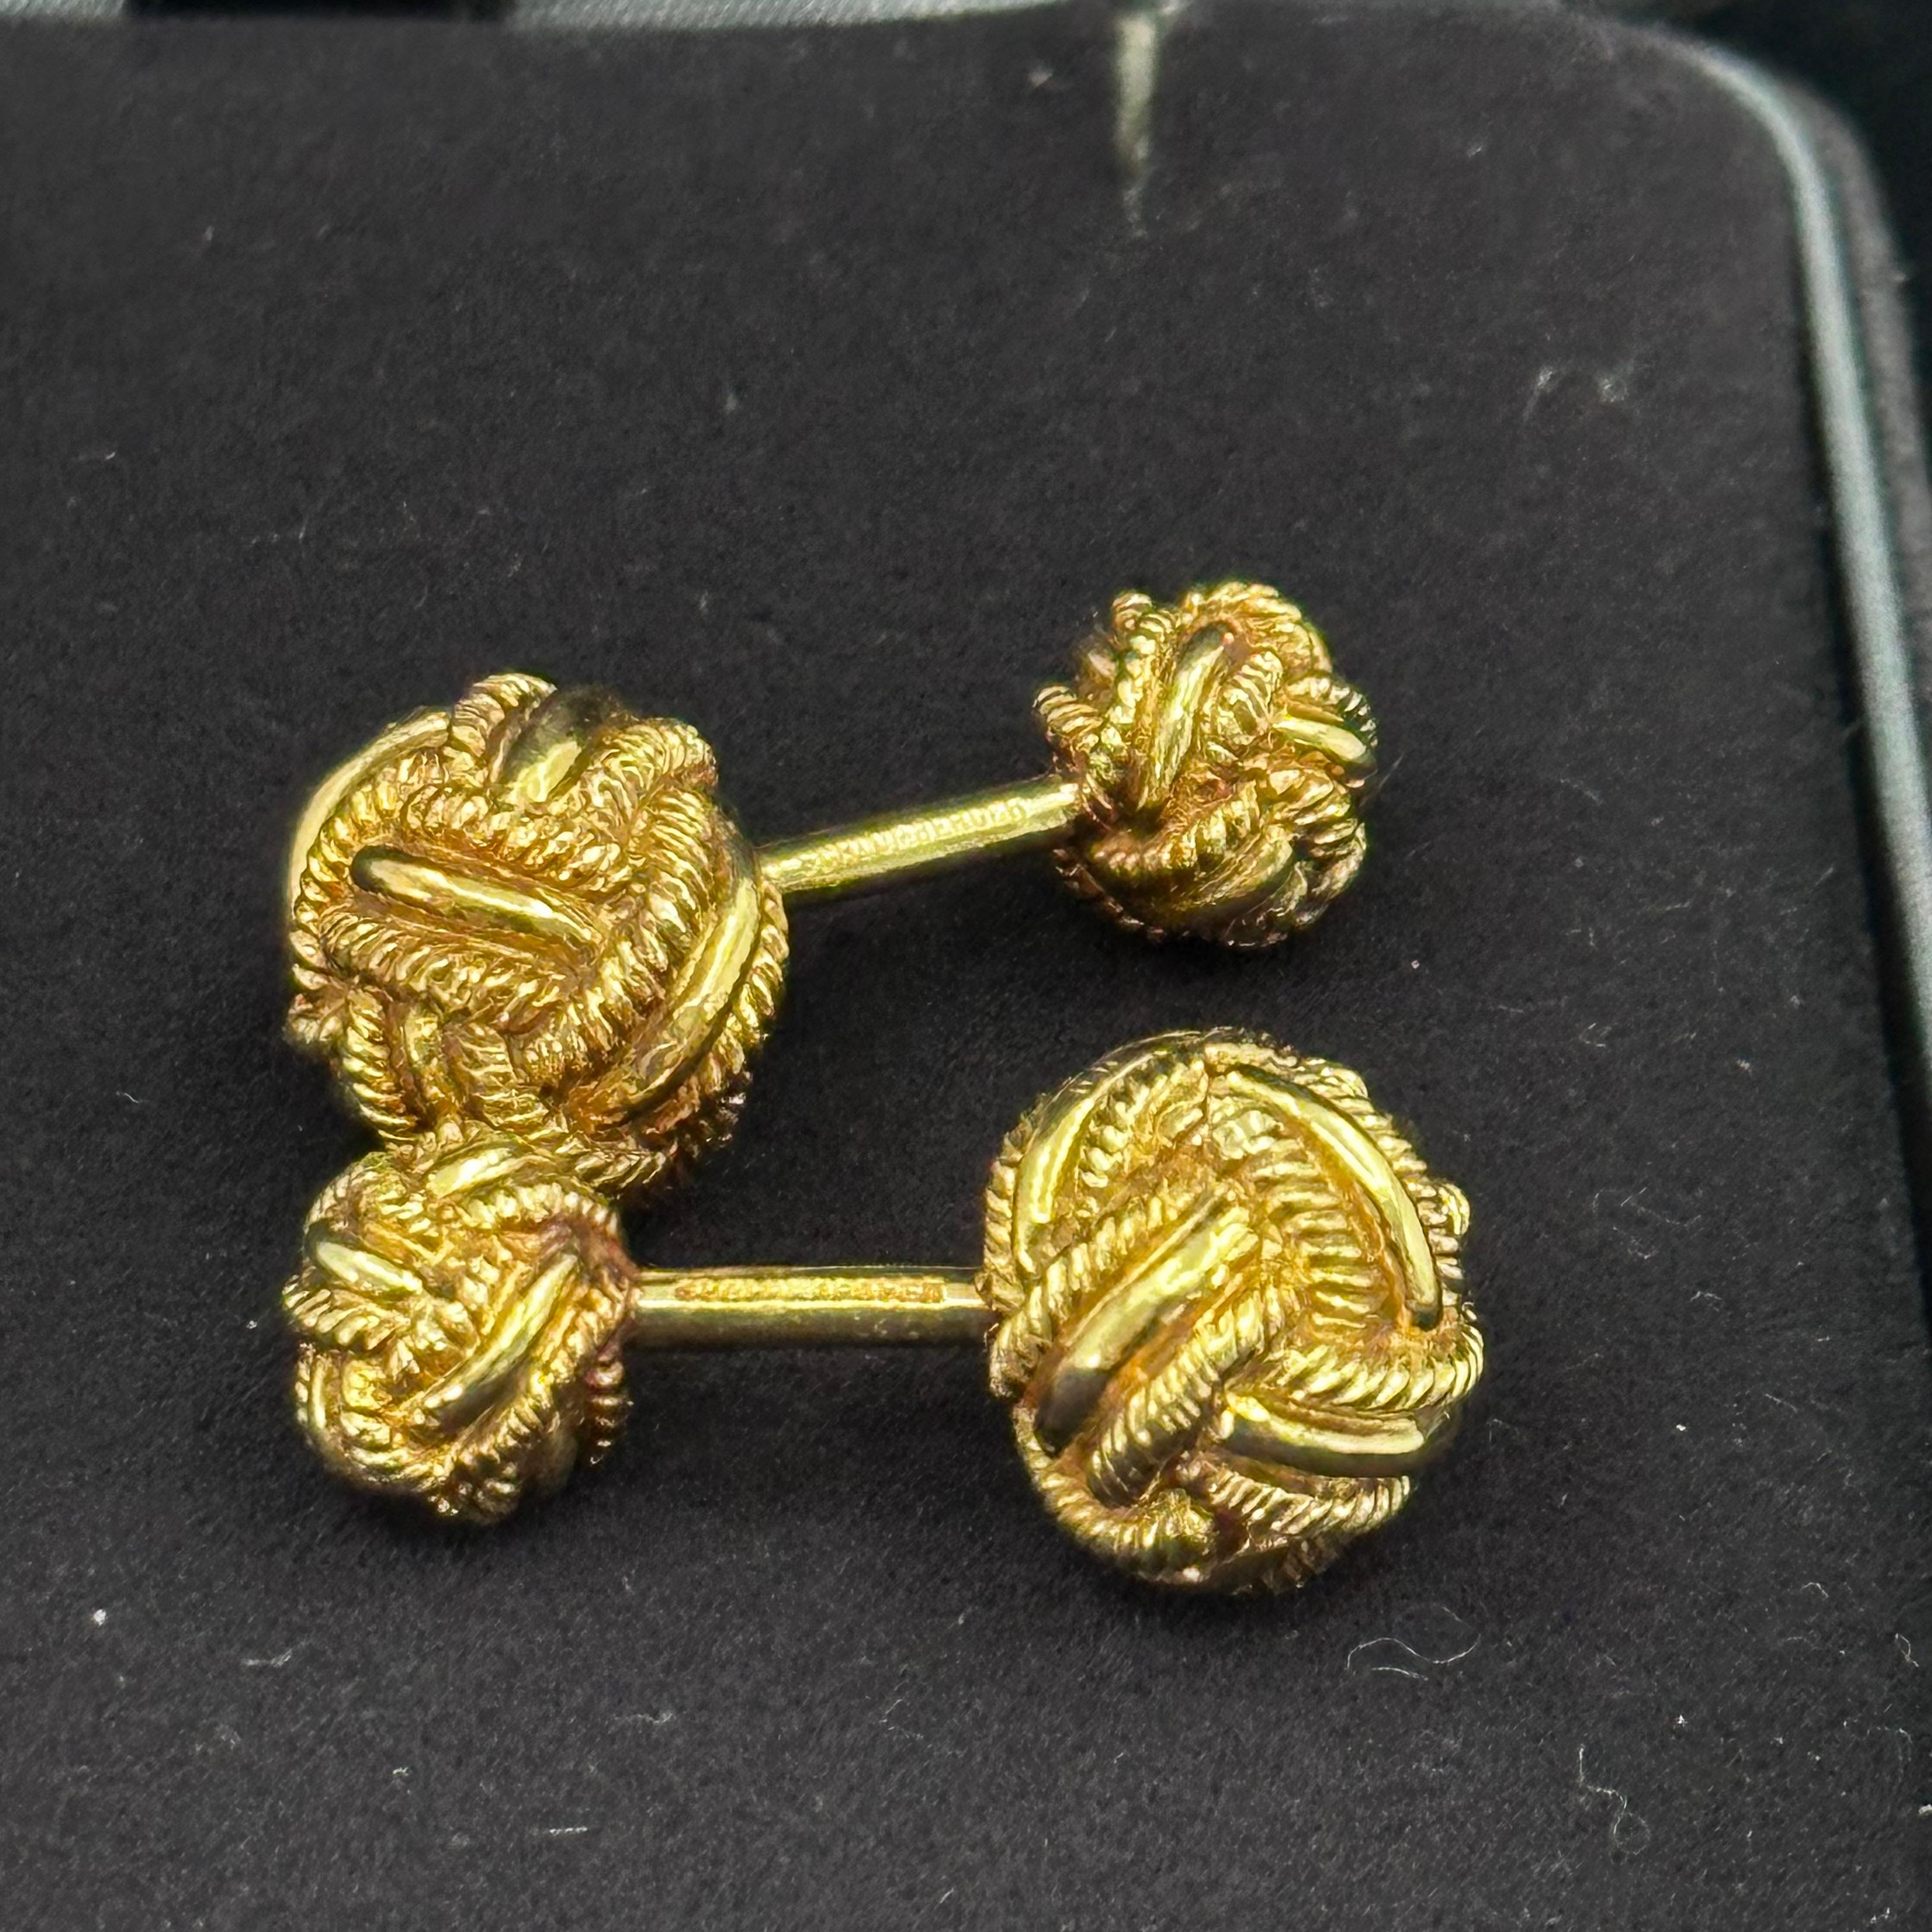 Tiffany & Co Schlumberger Cufflinks
18k Yellow Gold 
Weight: 20 g 
Length: 1 1/16 or 27 mm

Handsome woven knot motif 
Signed Tiffany and Company Schlumberger 18 k
